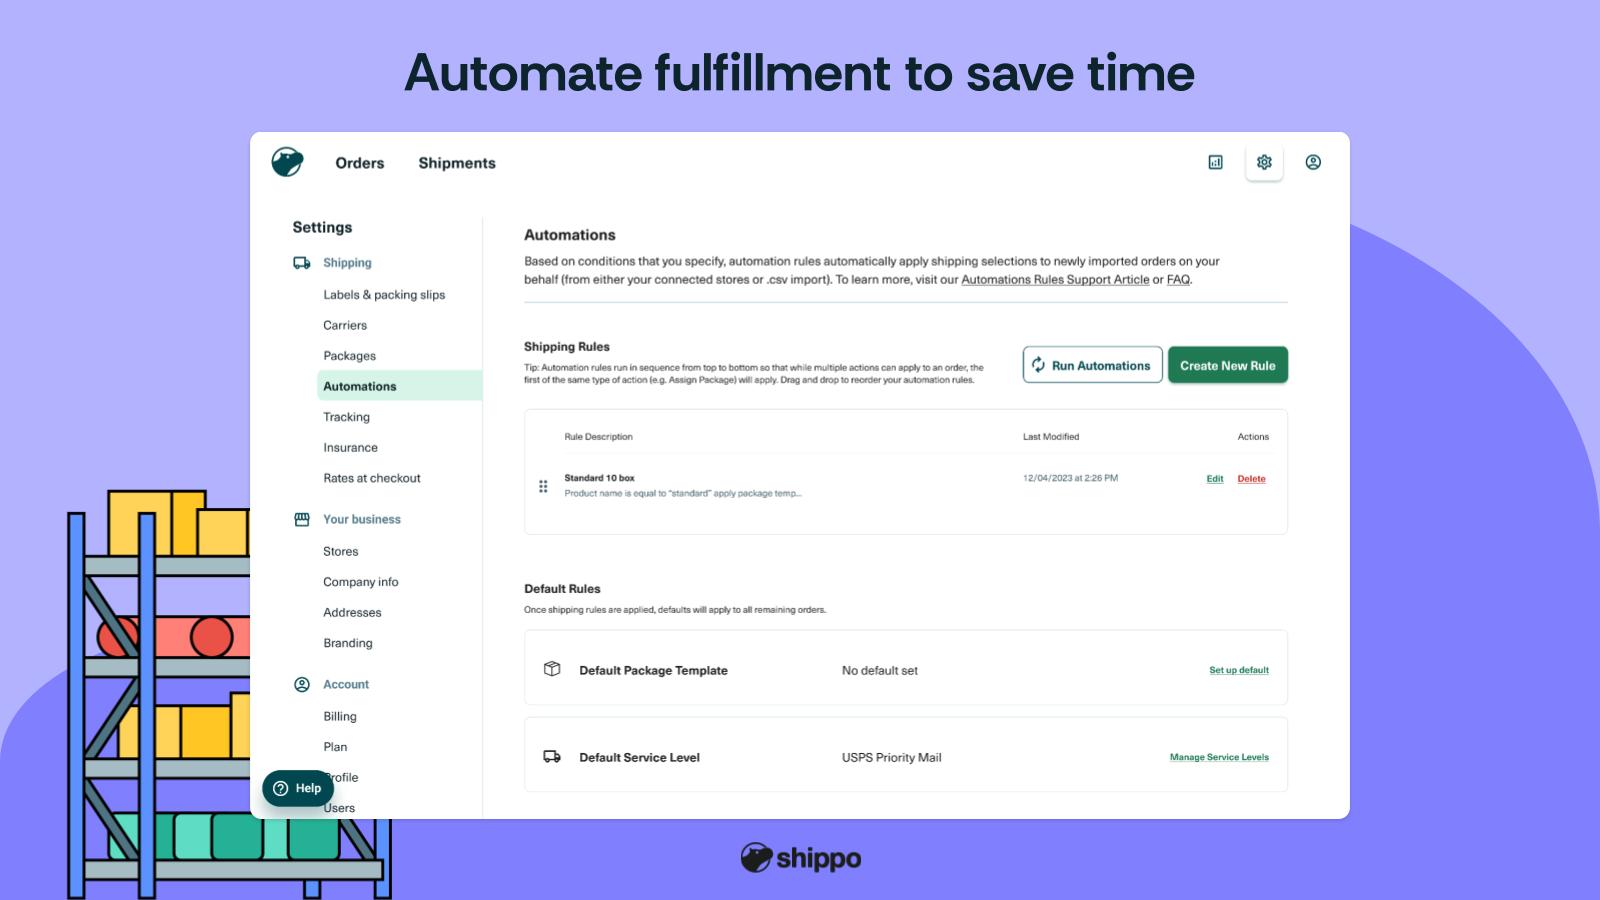 Automate fulfillment to save time